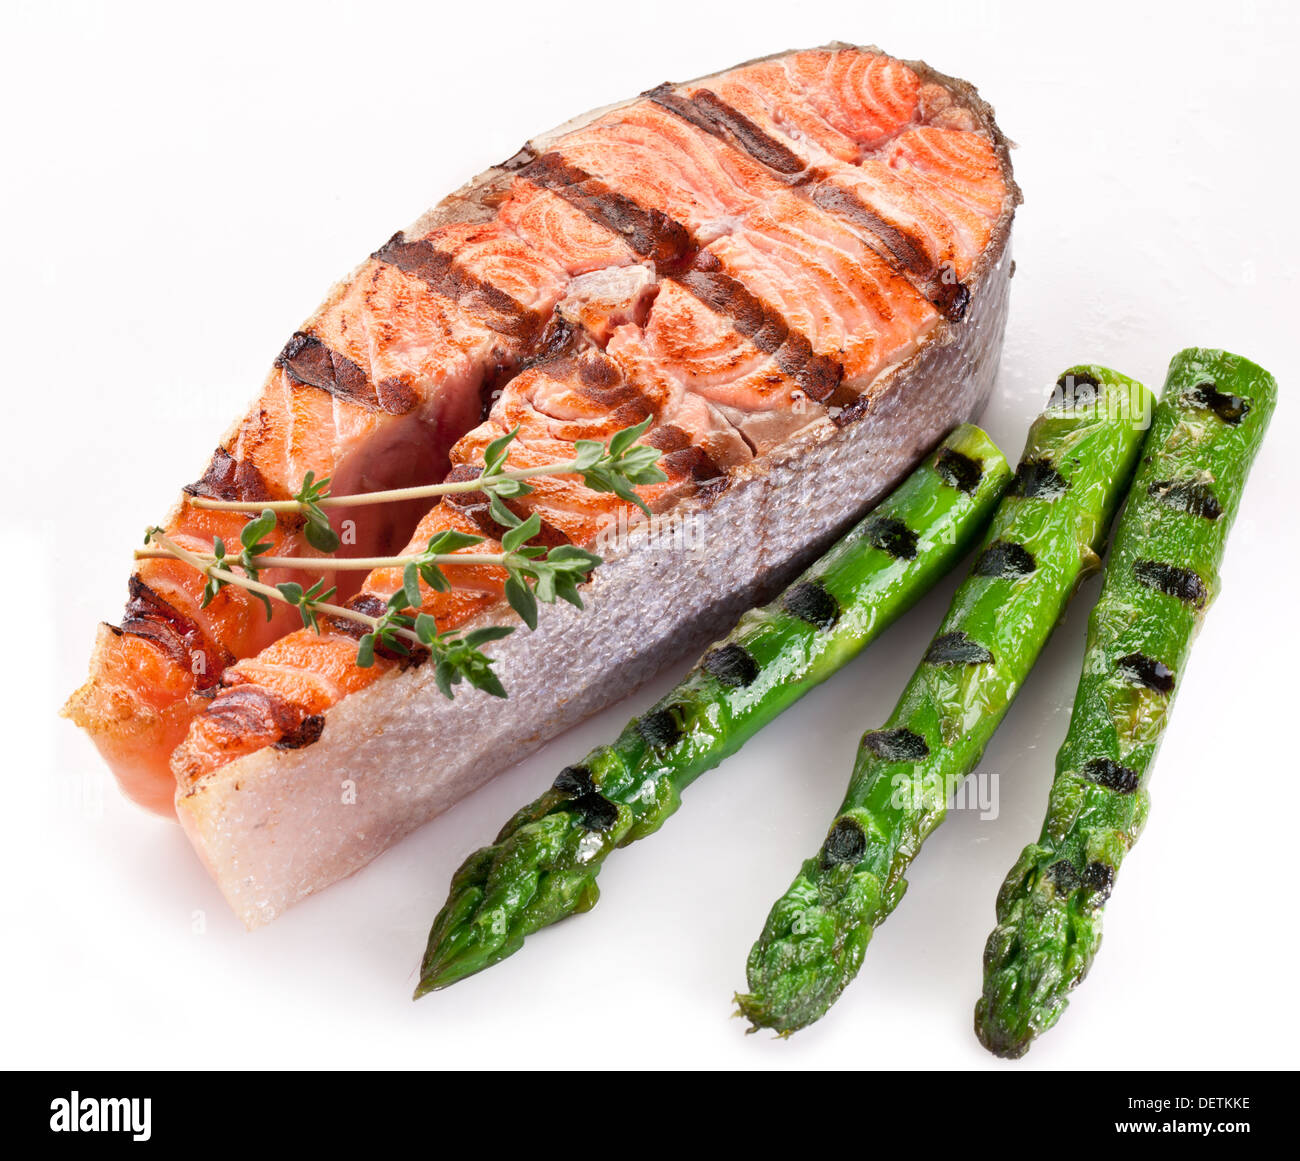 Grilled salmon and asparagus on a white background. Stock Photo